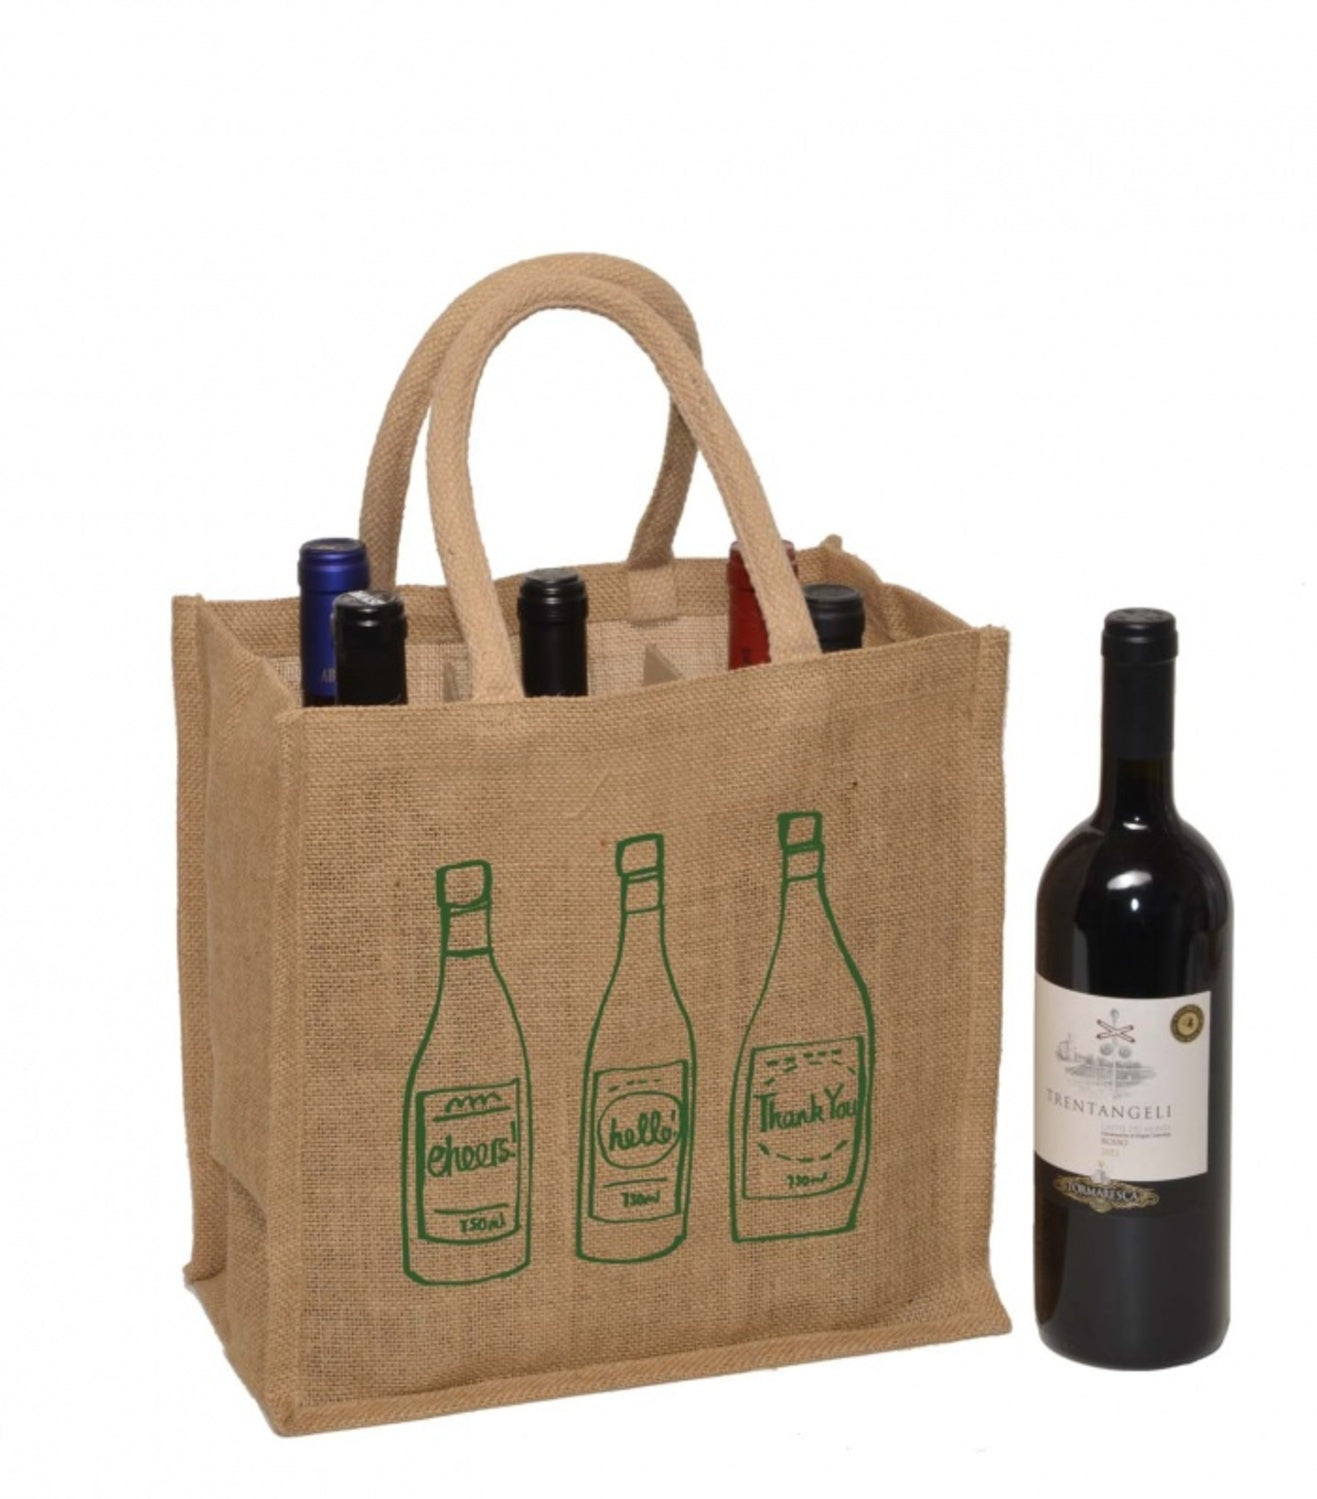 Most Affordable Initial Tote Bags as Wine Bags - ToteBagFactory